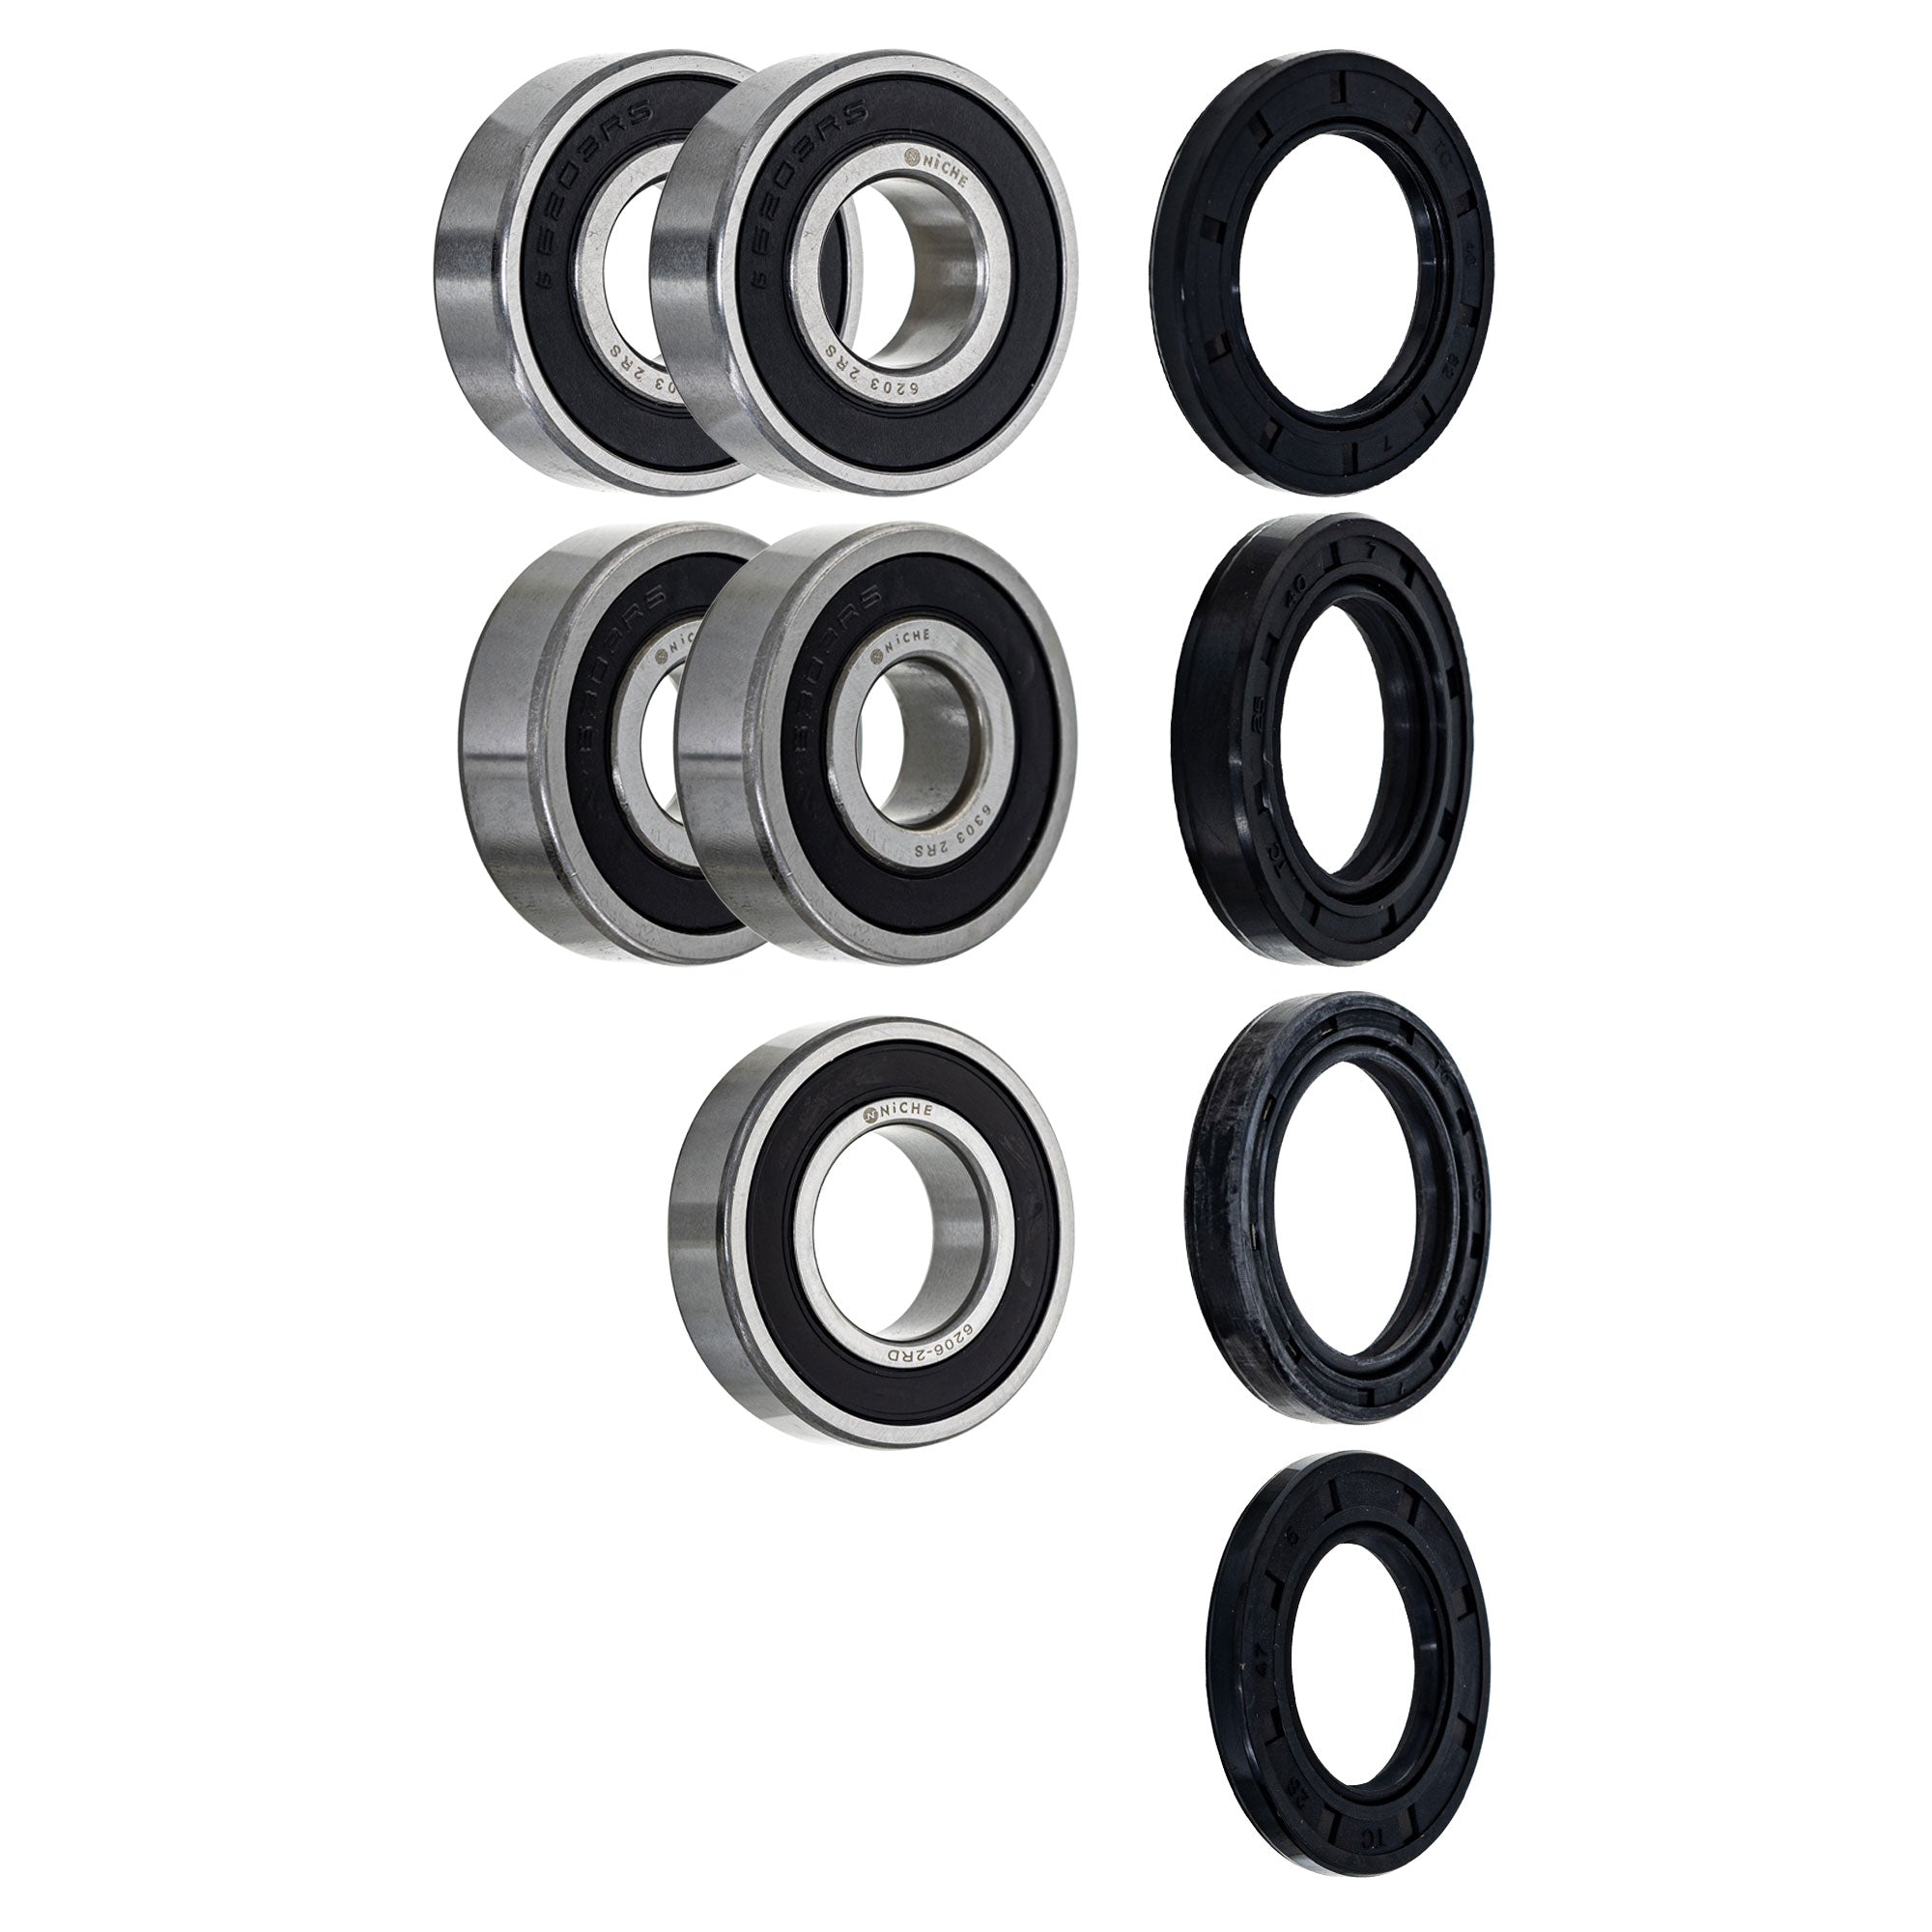 Wheel Bearing Seal Kit for zOTHER Ref No 650 NICHE MK1008544